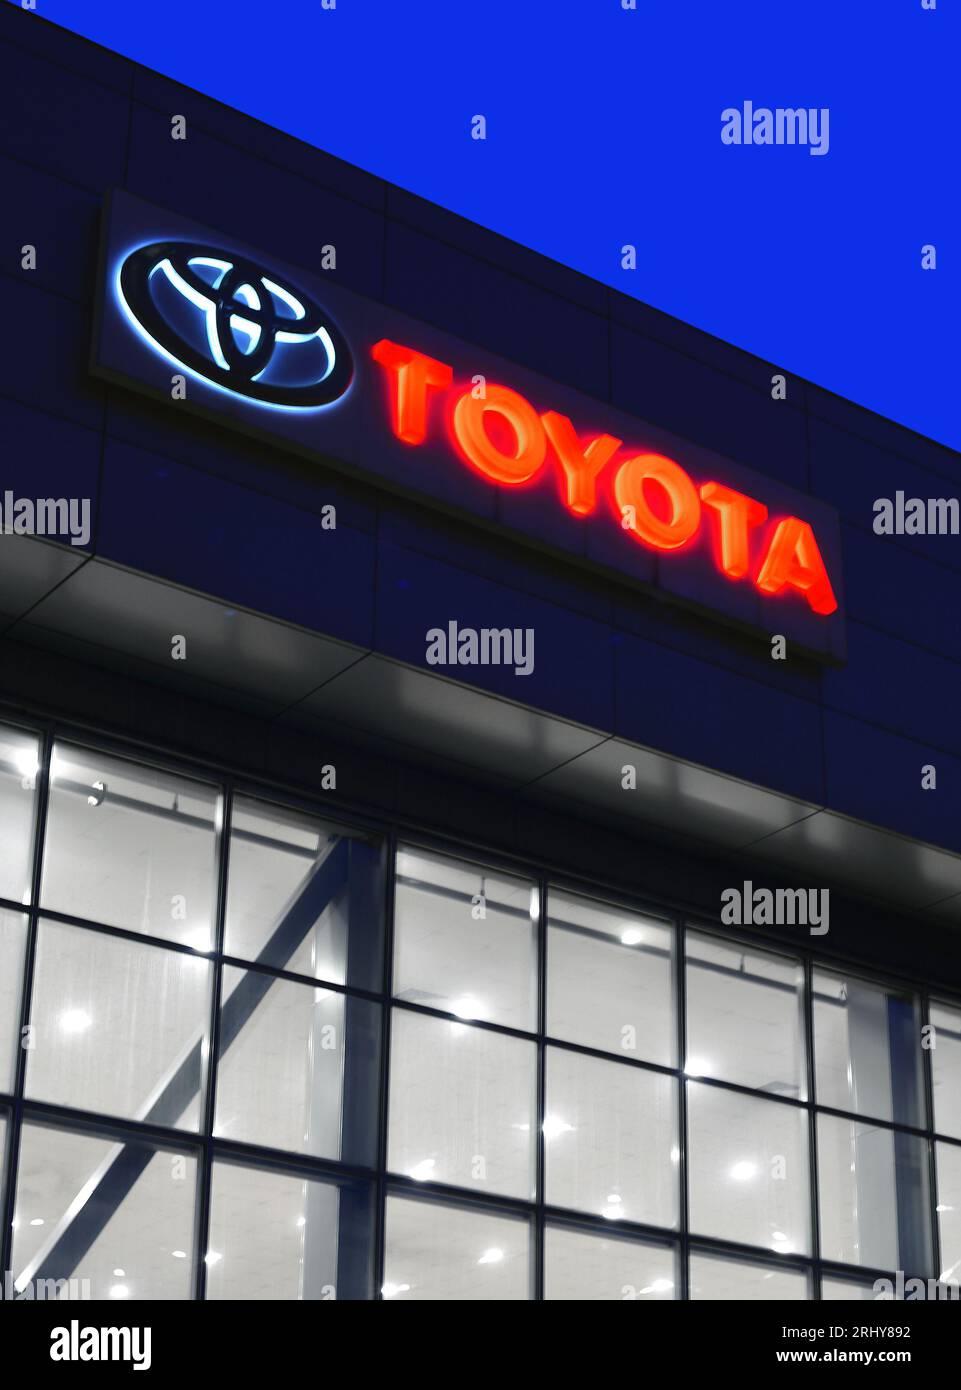 the Toyota neon sign at night on commercial building Stock Photo